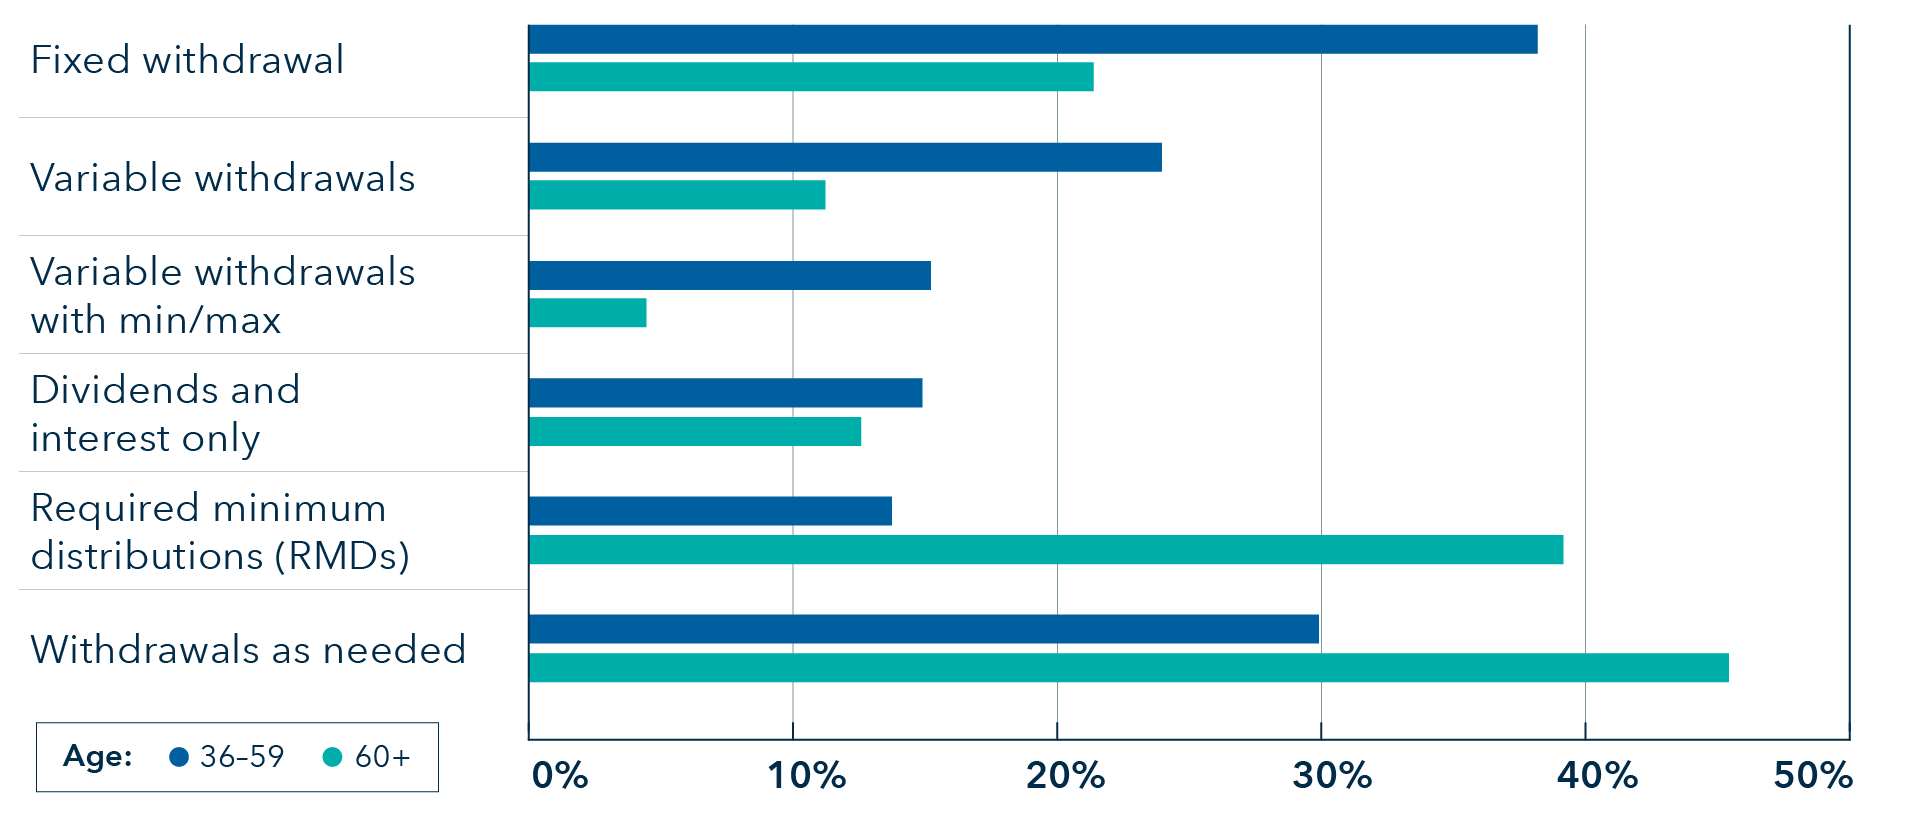 This is a bar chart representing withdrawal approaches among surveyed investors. Ages 36 to 59 are represented by blue bars, while age 60 and beyond are represented by teal bars.  38.1% of investors aged 36 to 59 preferred a fixed withdrawal approach versus 21.4% of investors aged 60+. 23.9% of investors aged 36 to 59 preferred a variable withdrawals approach versus 11.2% of investors aged 60+. 15.2% of investors aged 36 to 59 preferred a variable withdrawals with minimum and or maximums approach versus 4.6% of investors aged 60+. 14.9% of investors aged 36 to 59 preferred a dividends and interest only approach versus 12.4% of investors aged 60+. 13.6% of investors aged 36 to 59 preferred a required minimum distributions (RMDs) approach versus 39.1% of investors aged 60+. 30.1% of investors aged 36 to 59 preferred a withdrawals as needed approach versus 45.3% of investors aged 60+. 